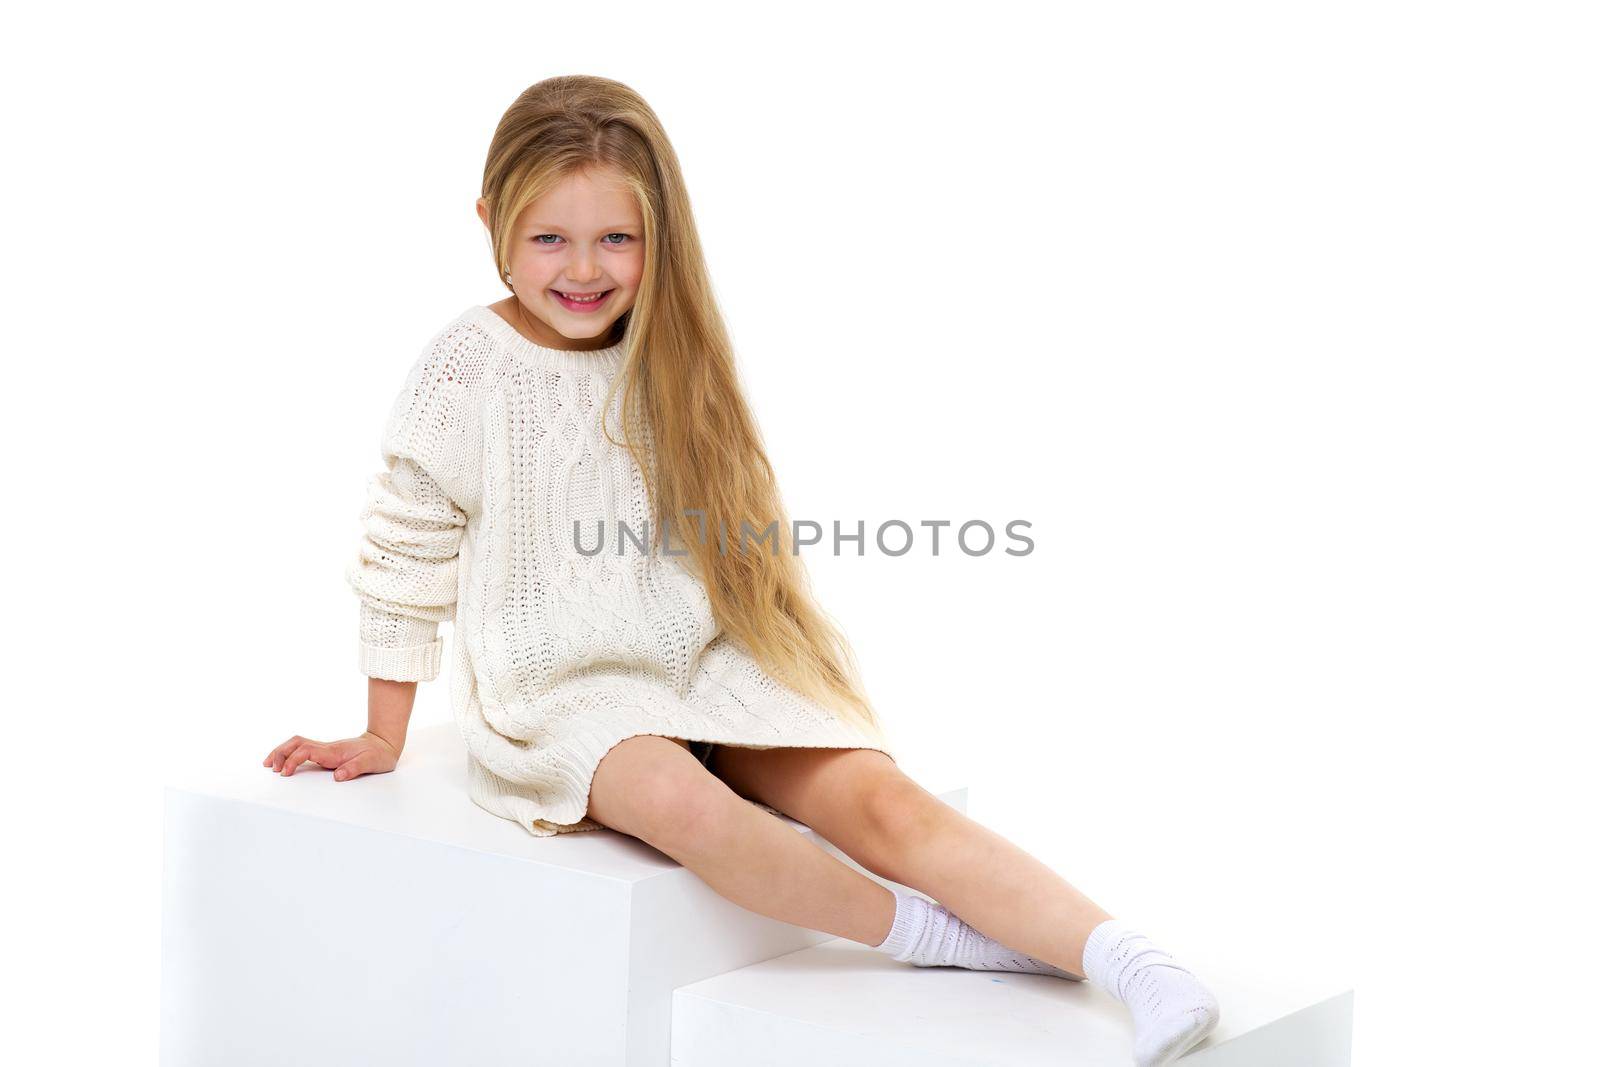 Cute little girl wearing warm knitted dress sitting on white staircase. Happy smiling long haired girl posing in studio against white background. Happy childhood concept